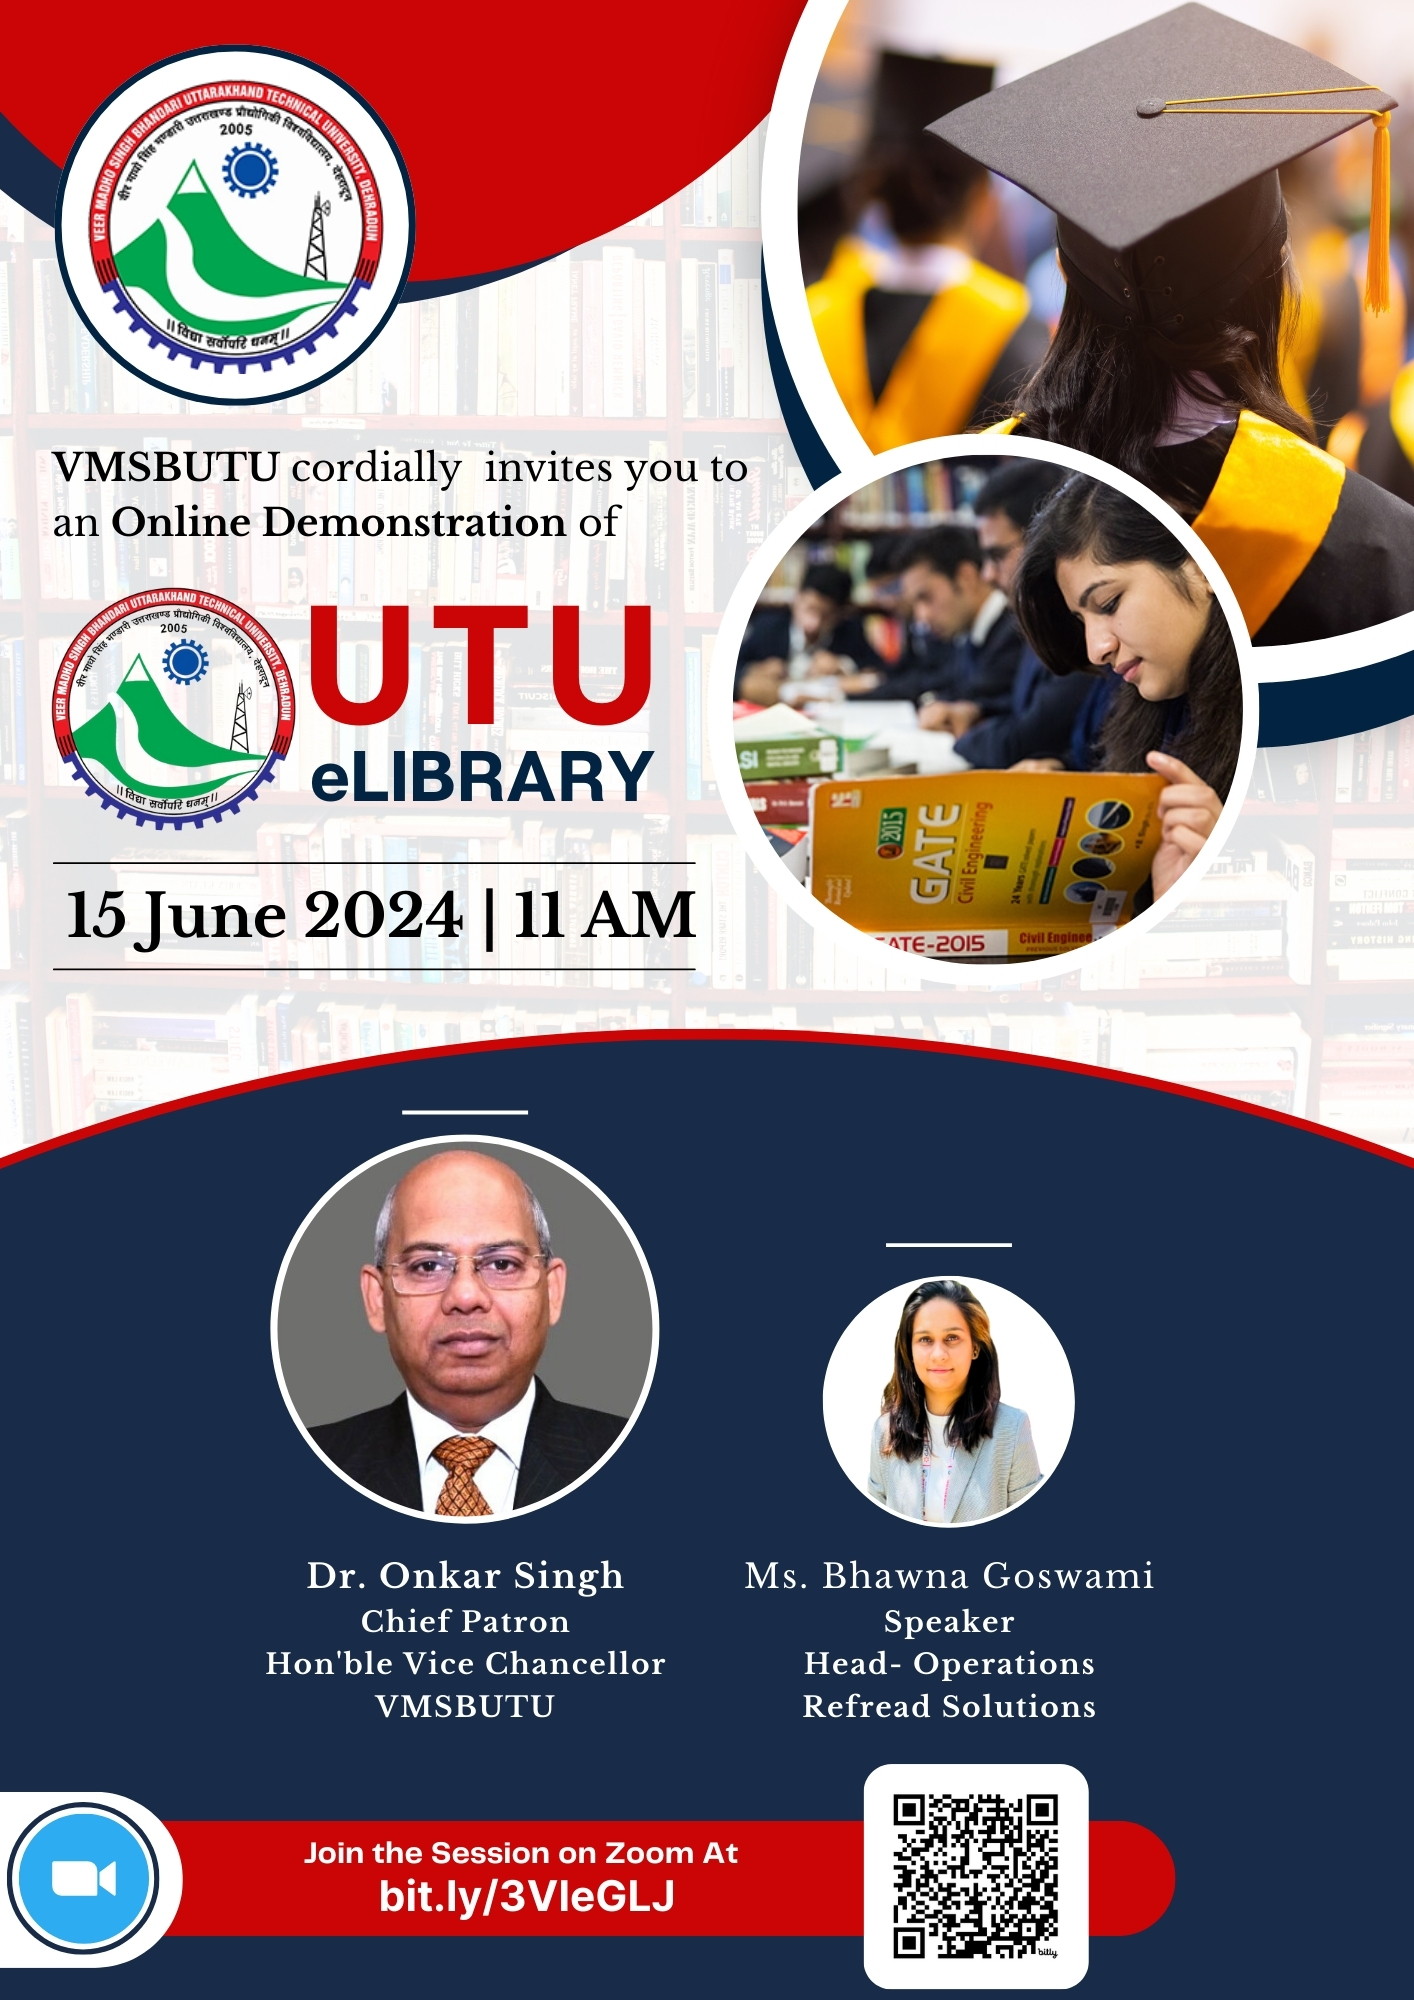 Online Demonstration of UTU eLIBRARY on 15th June 2024 at 11 am